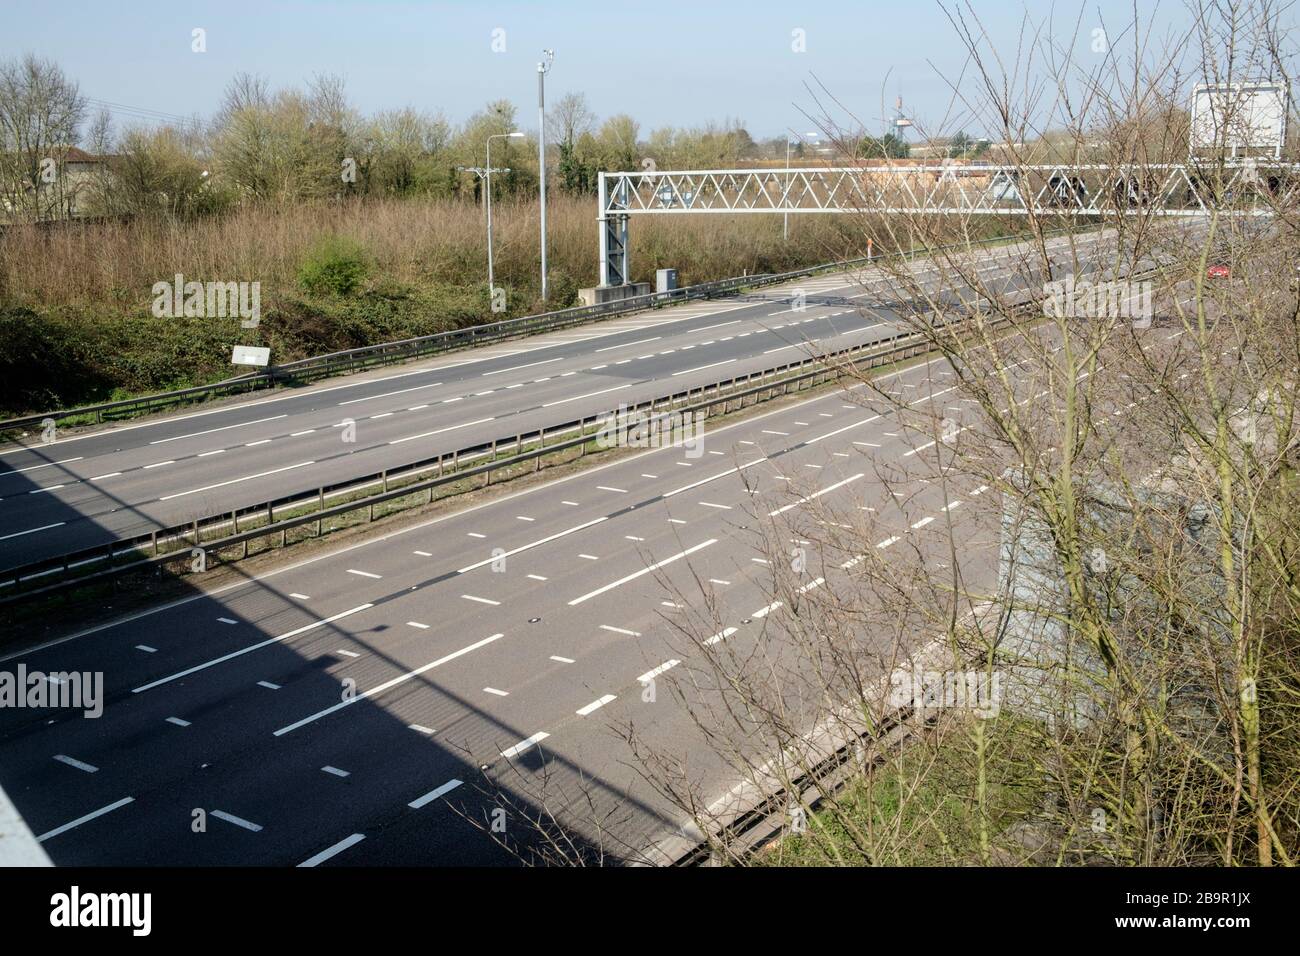 Very light traffic on the Bristol M4 for the UK Corvid 19 lockdown, day 1. Stock Photo